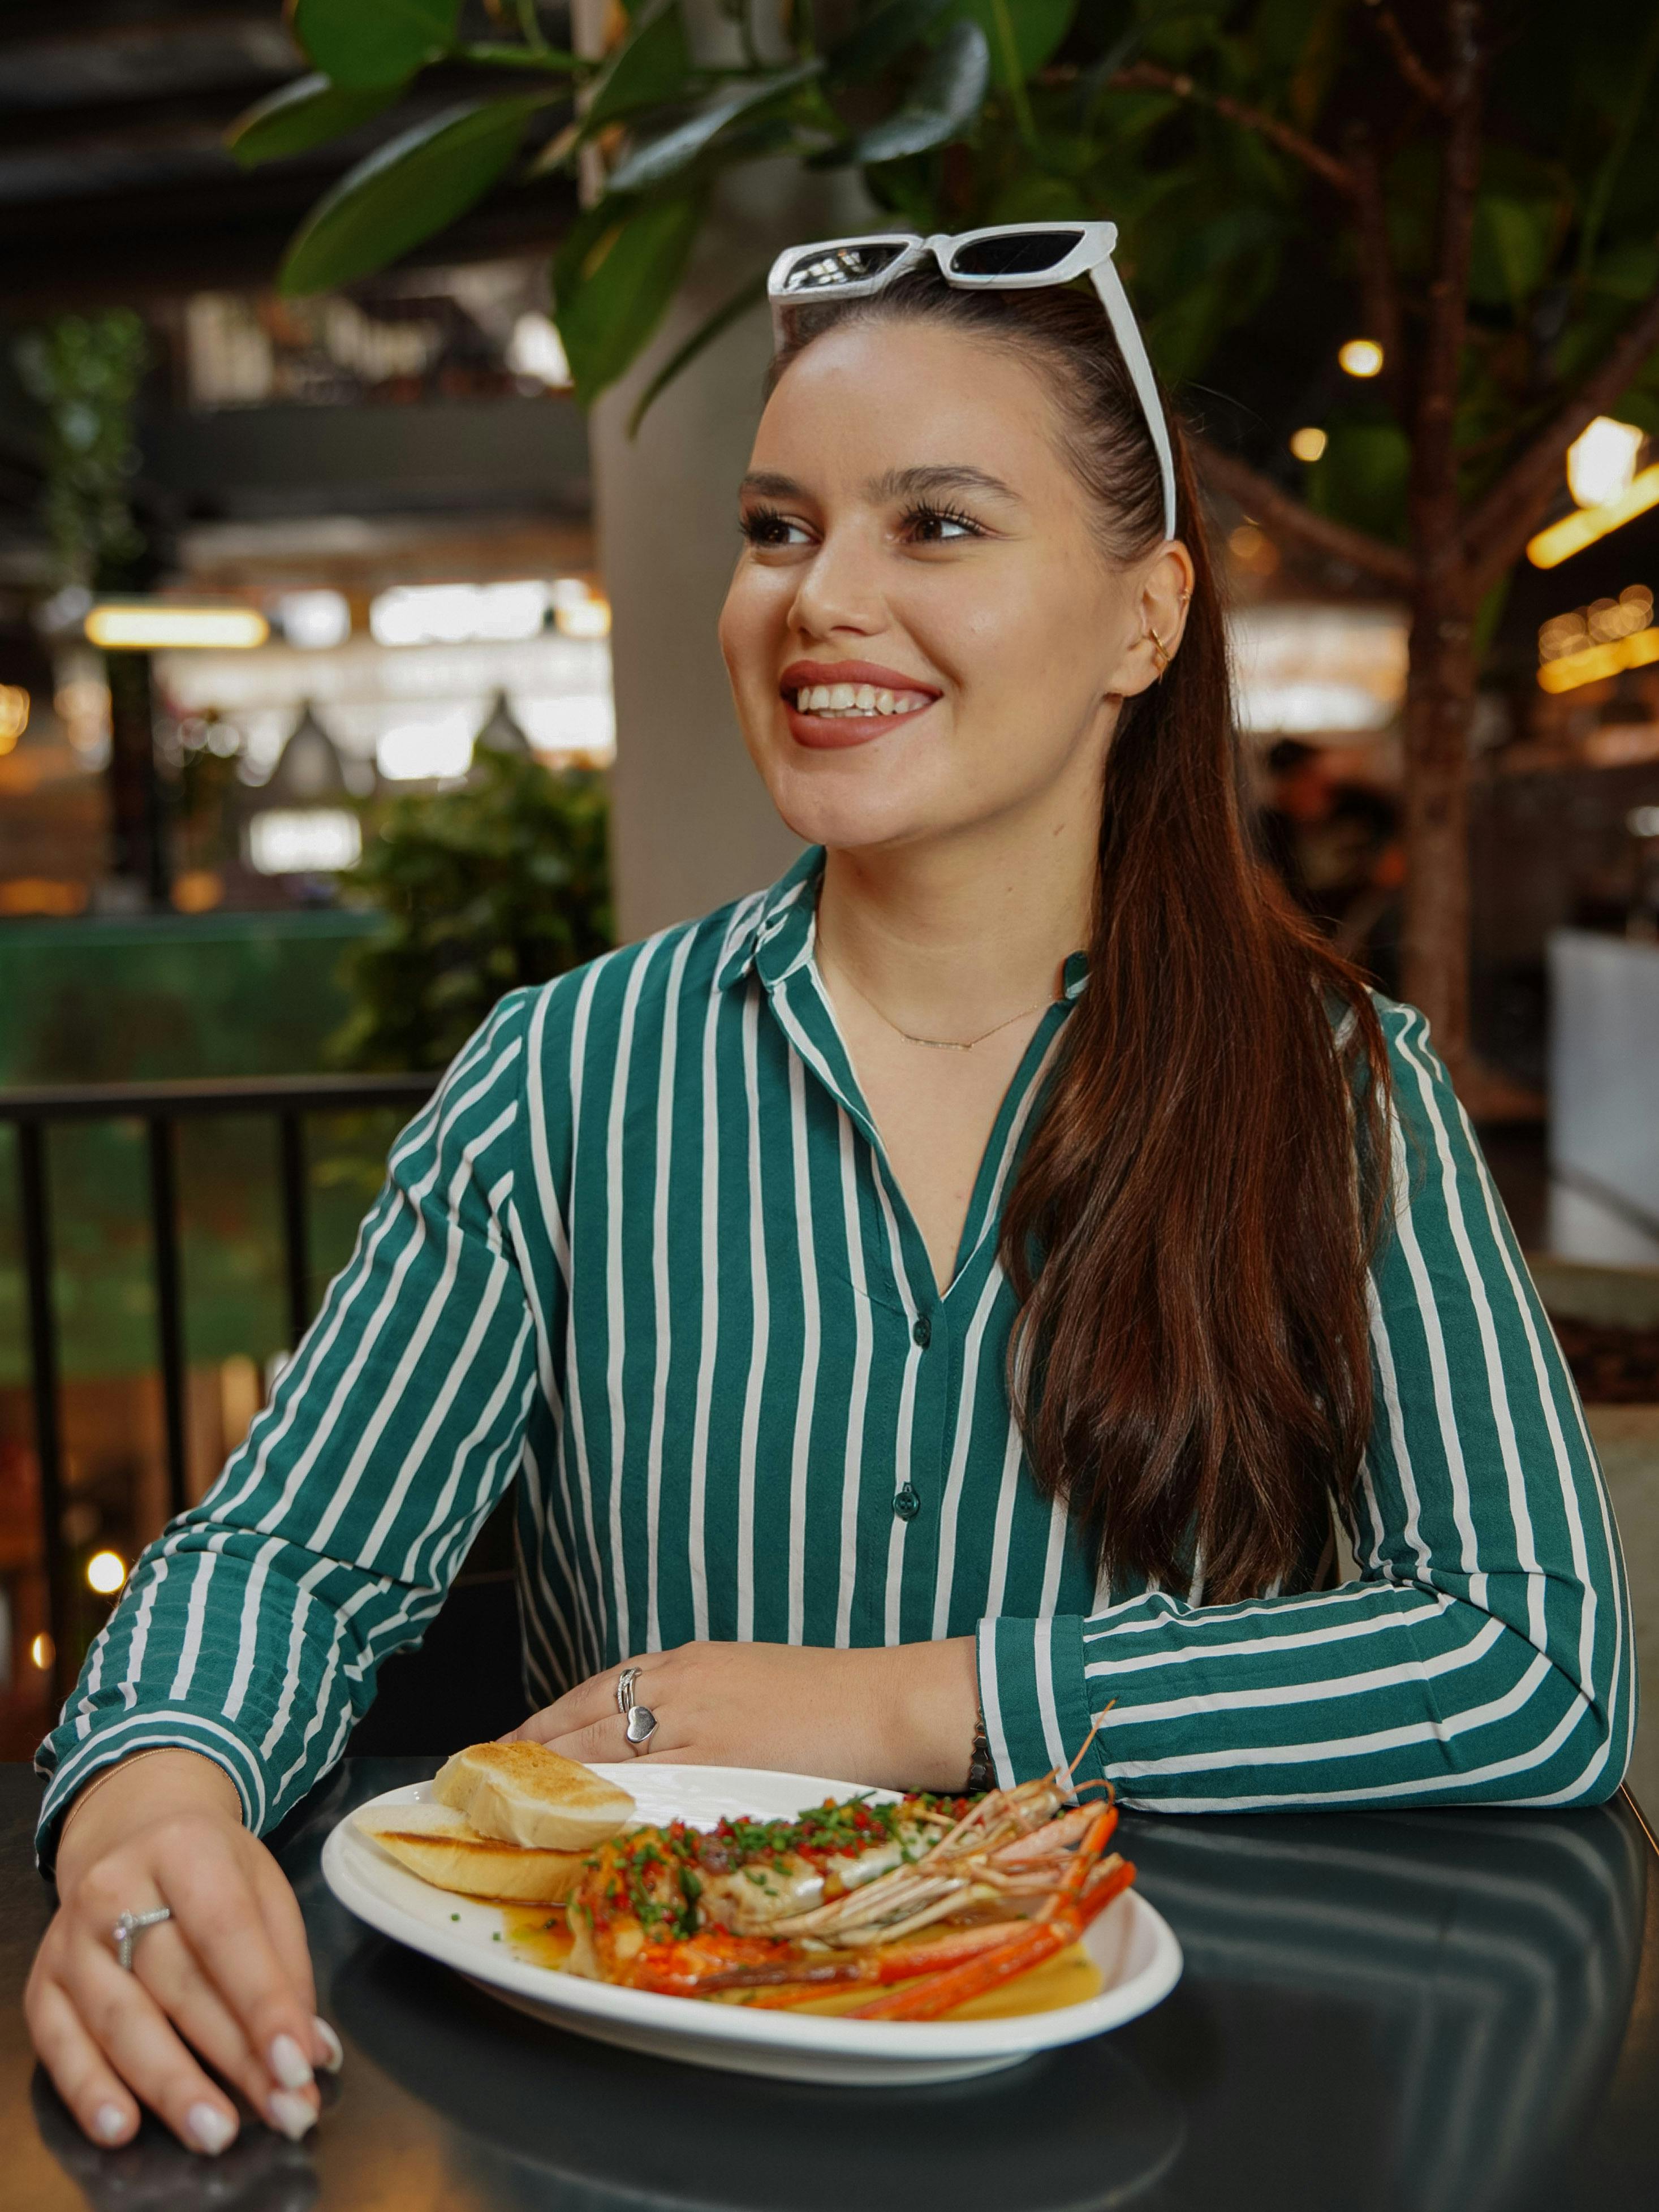 A happy young woman eating a lobster dinner | Source: Pexels